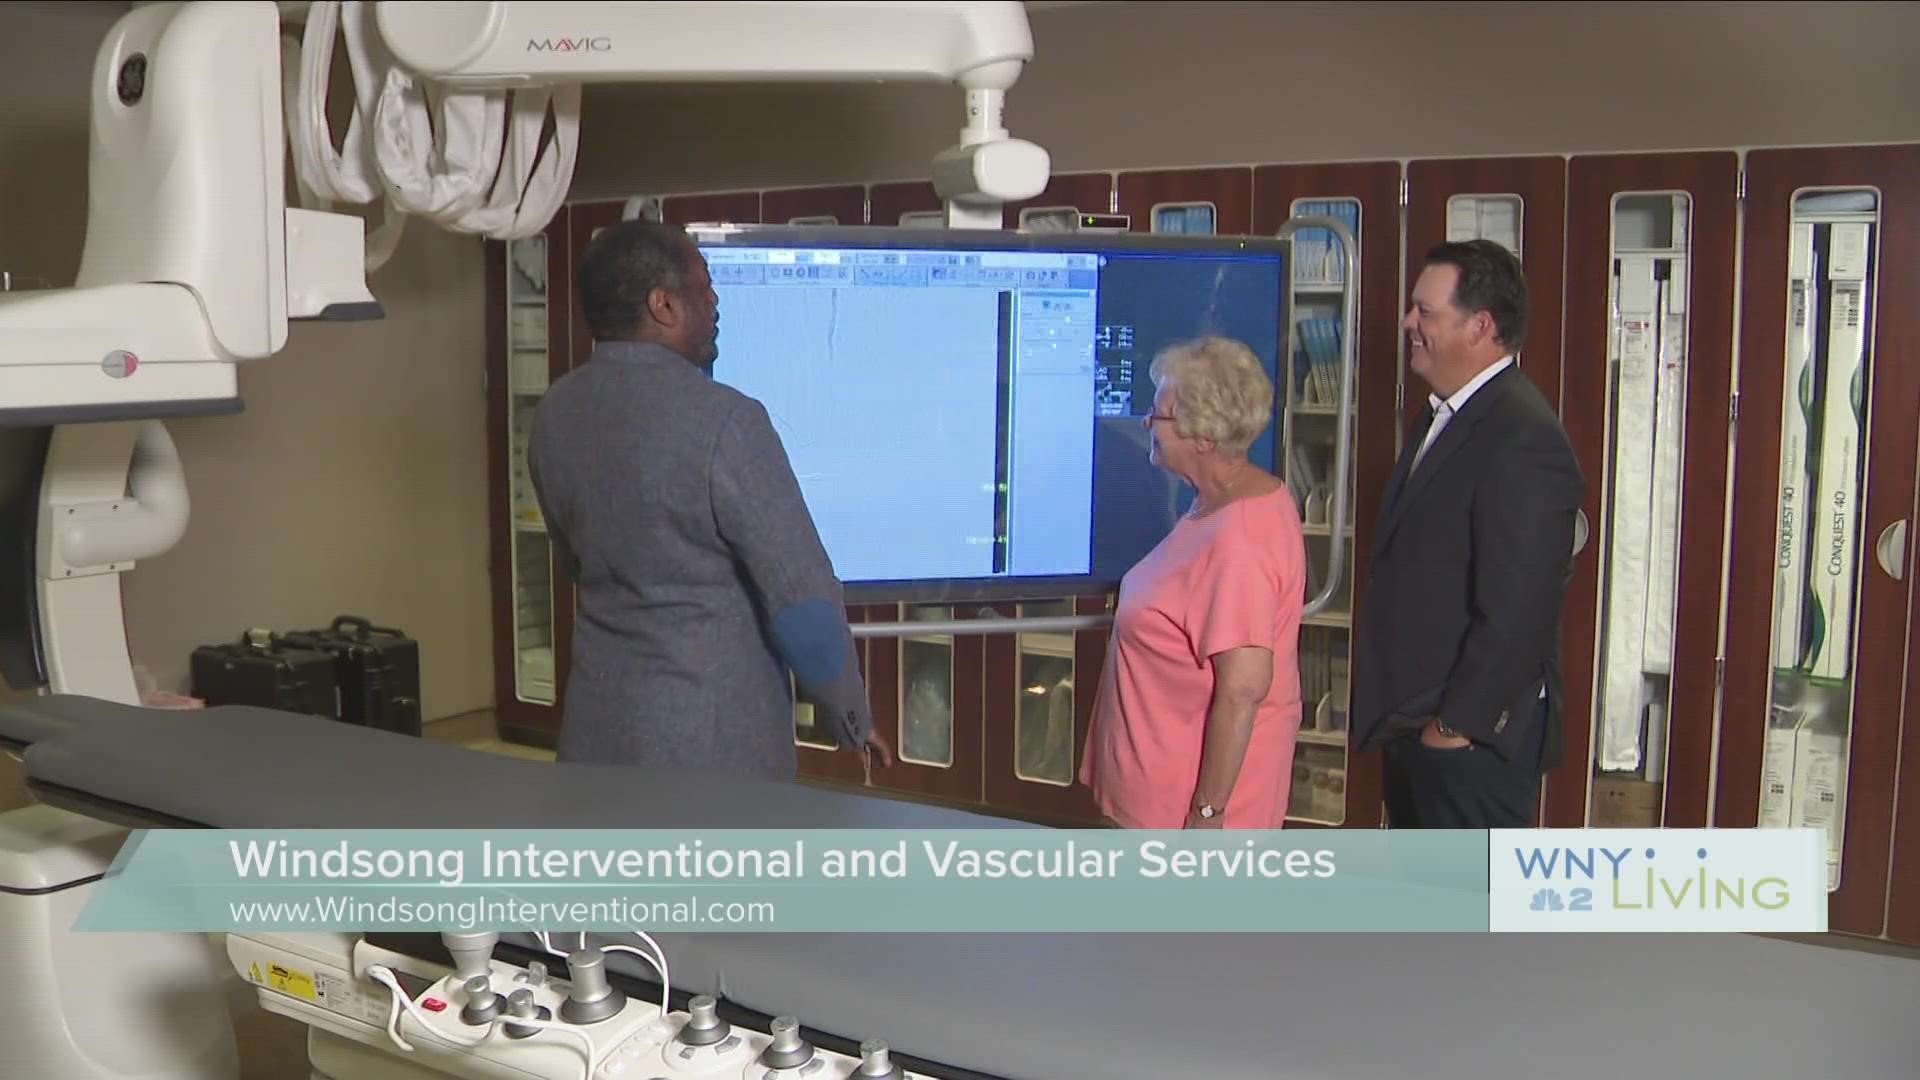 WNY Living - August 13 - Windsong Interventional & Vascular Services (THIS VIDEO IS SPONSORED BY WINDSONG INTERVENTIONAL & VASCULAR SERVICES)